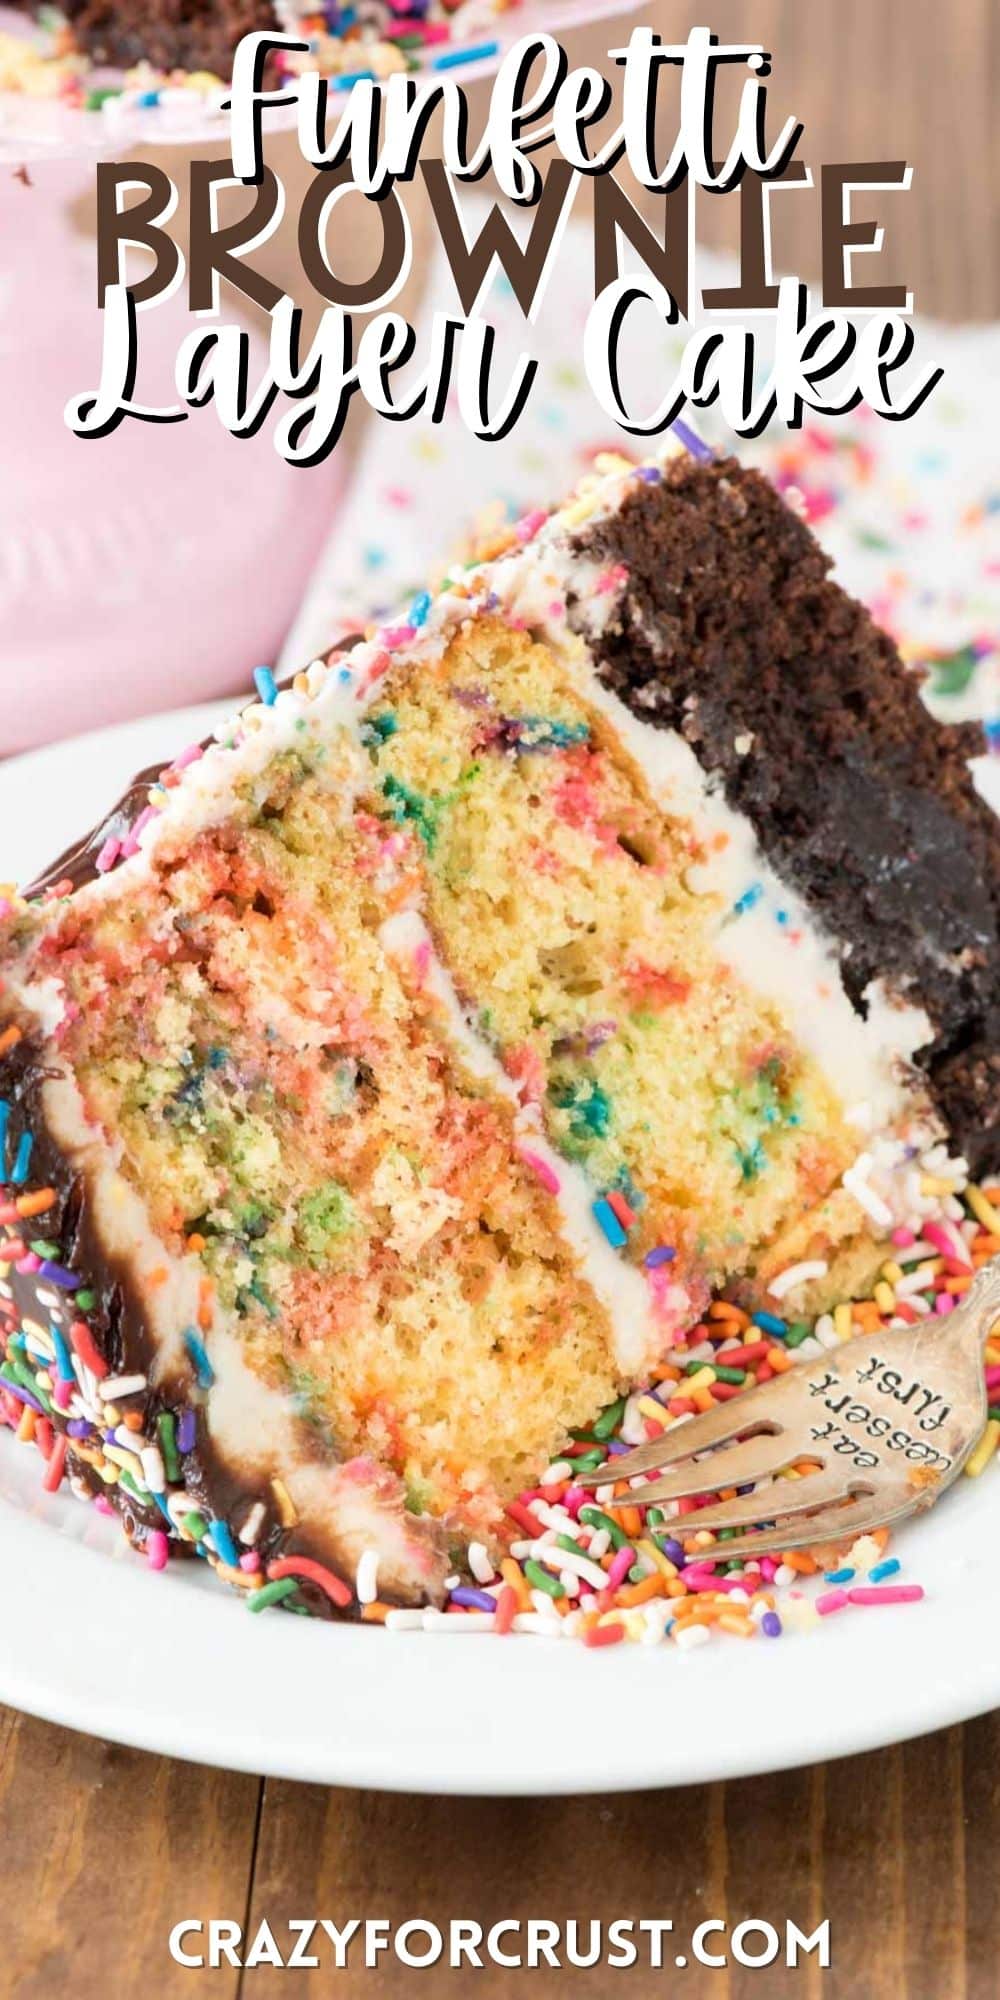 funfetti cake covered in sprinkles on a white plate with words on the image.